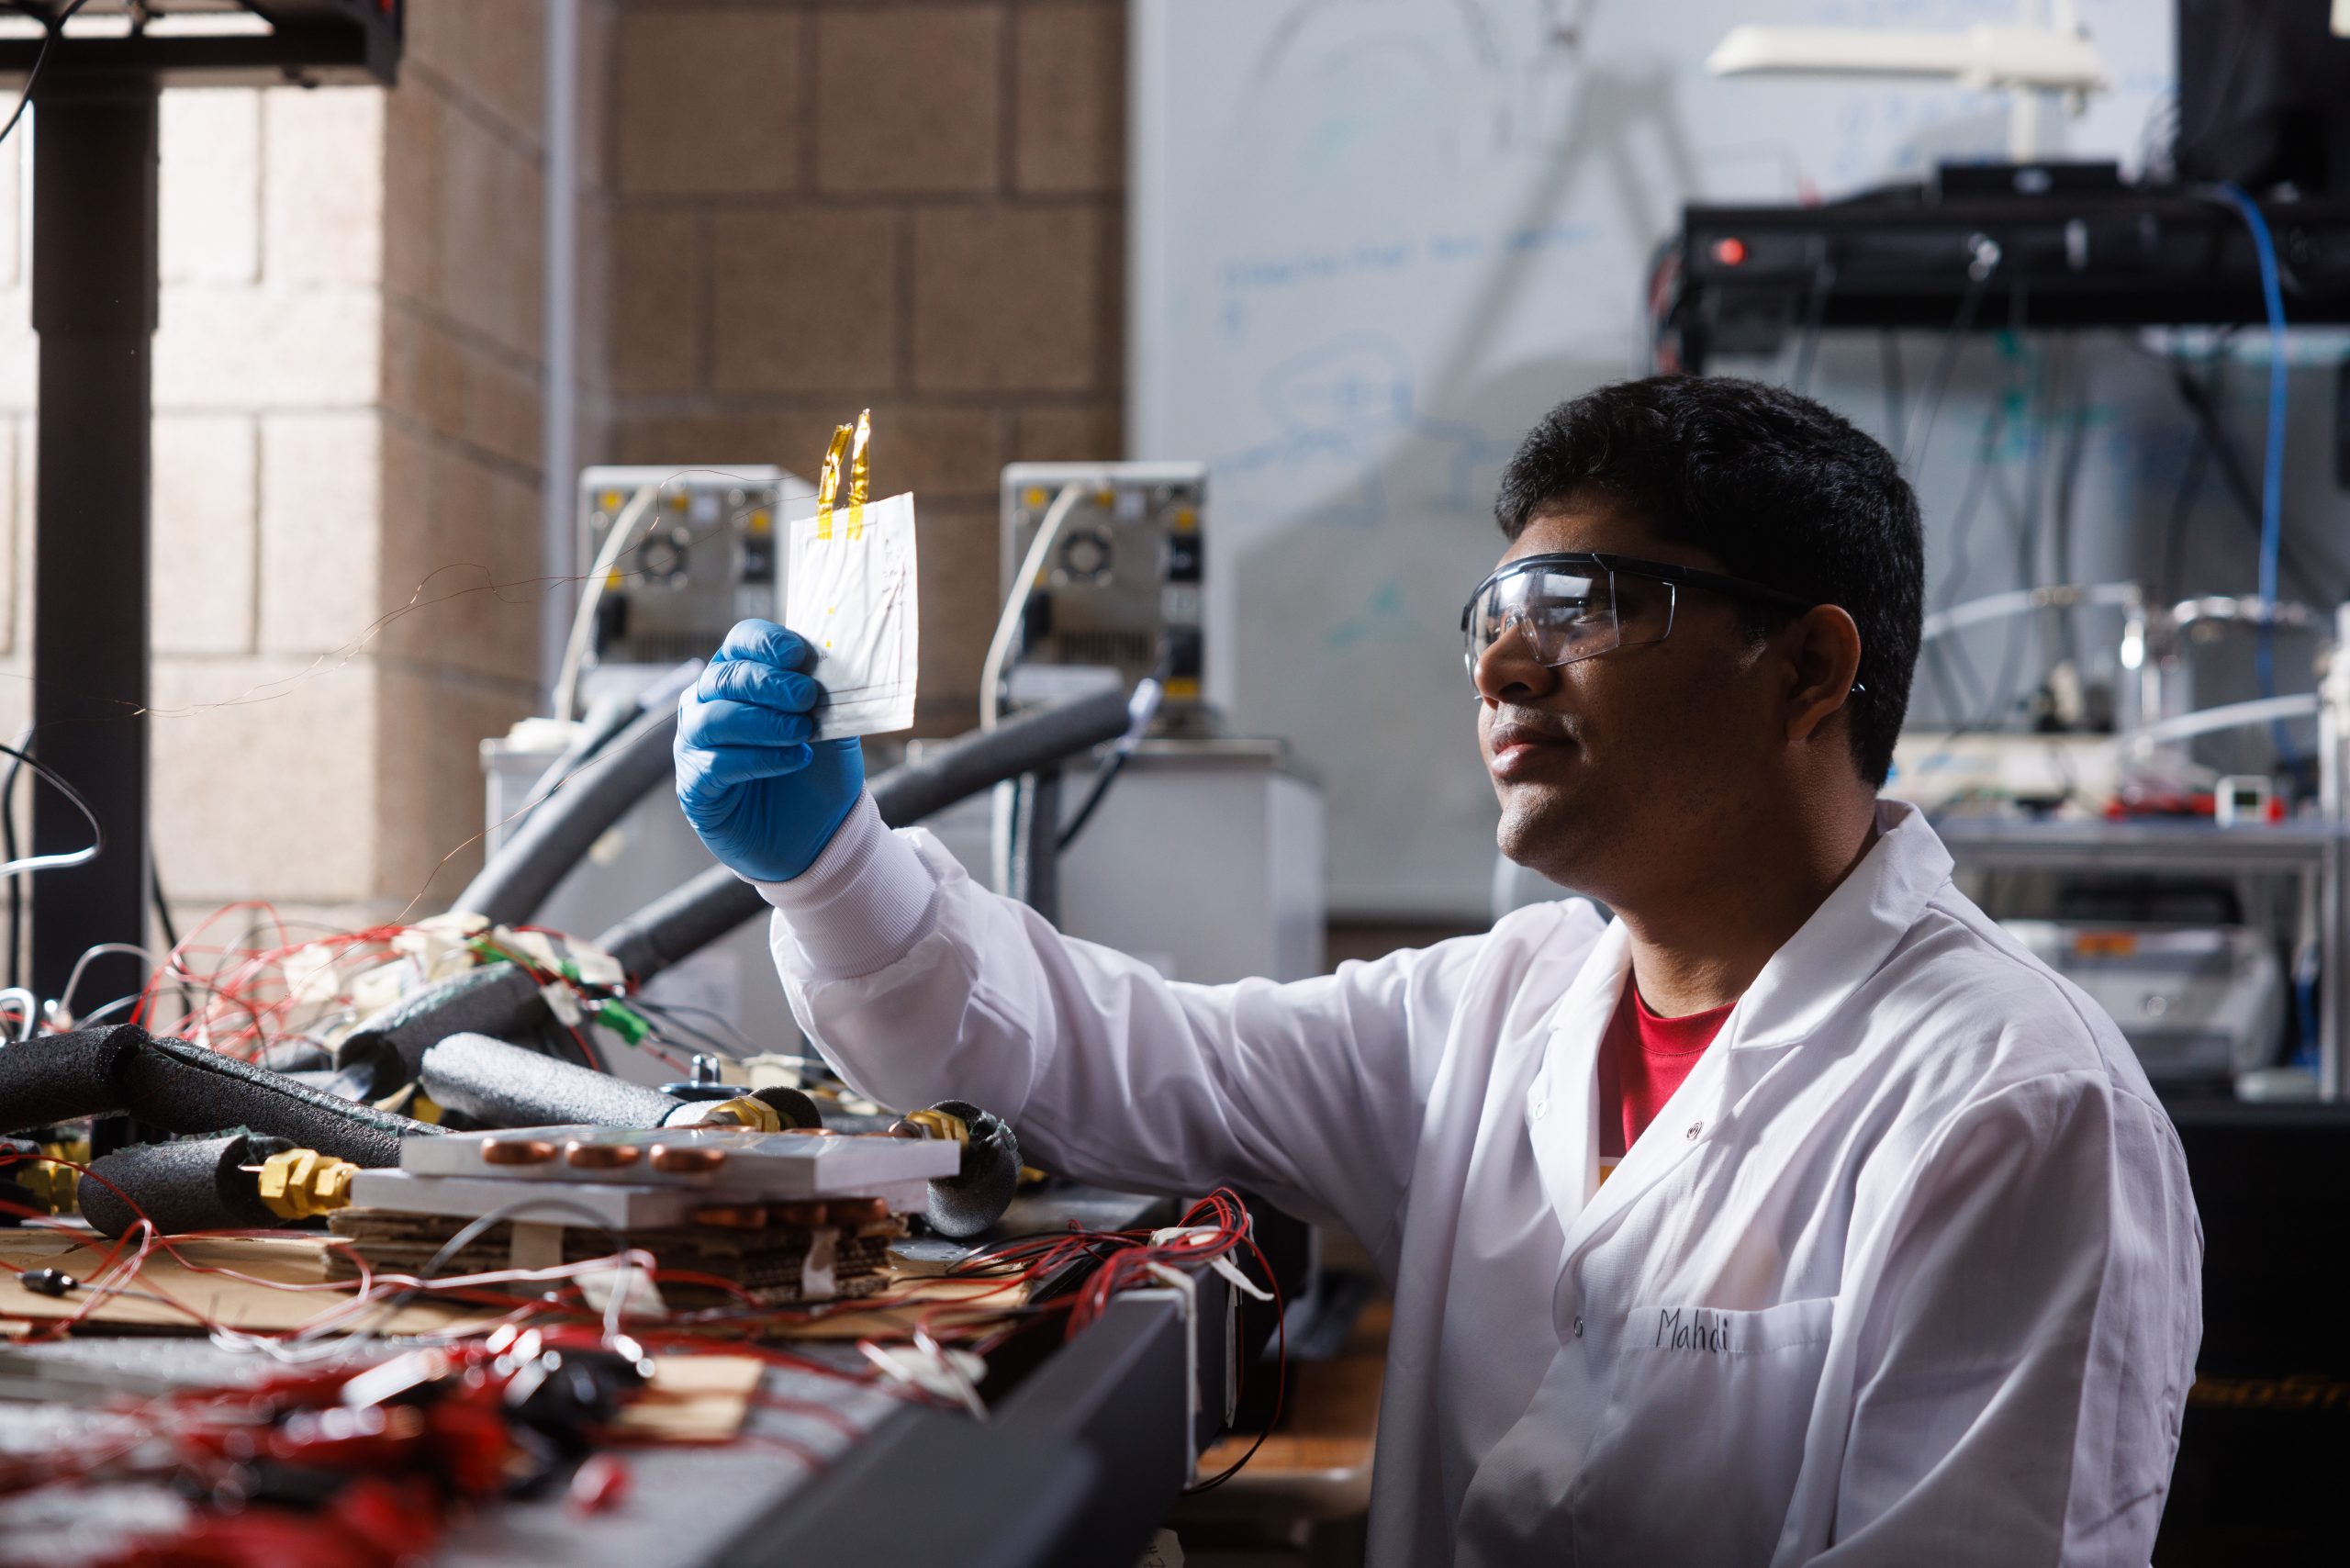 A student inside a lab holds up and examines a lithium-ion cell.